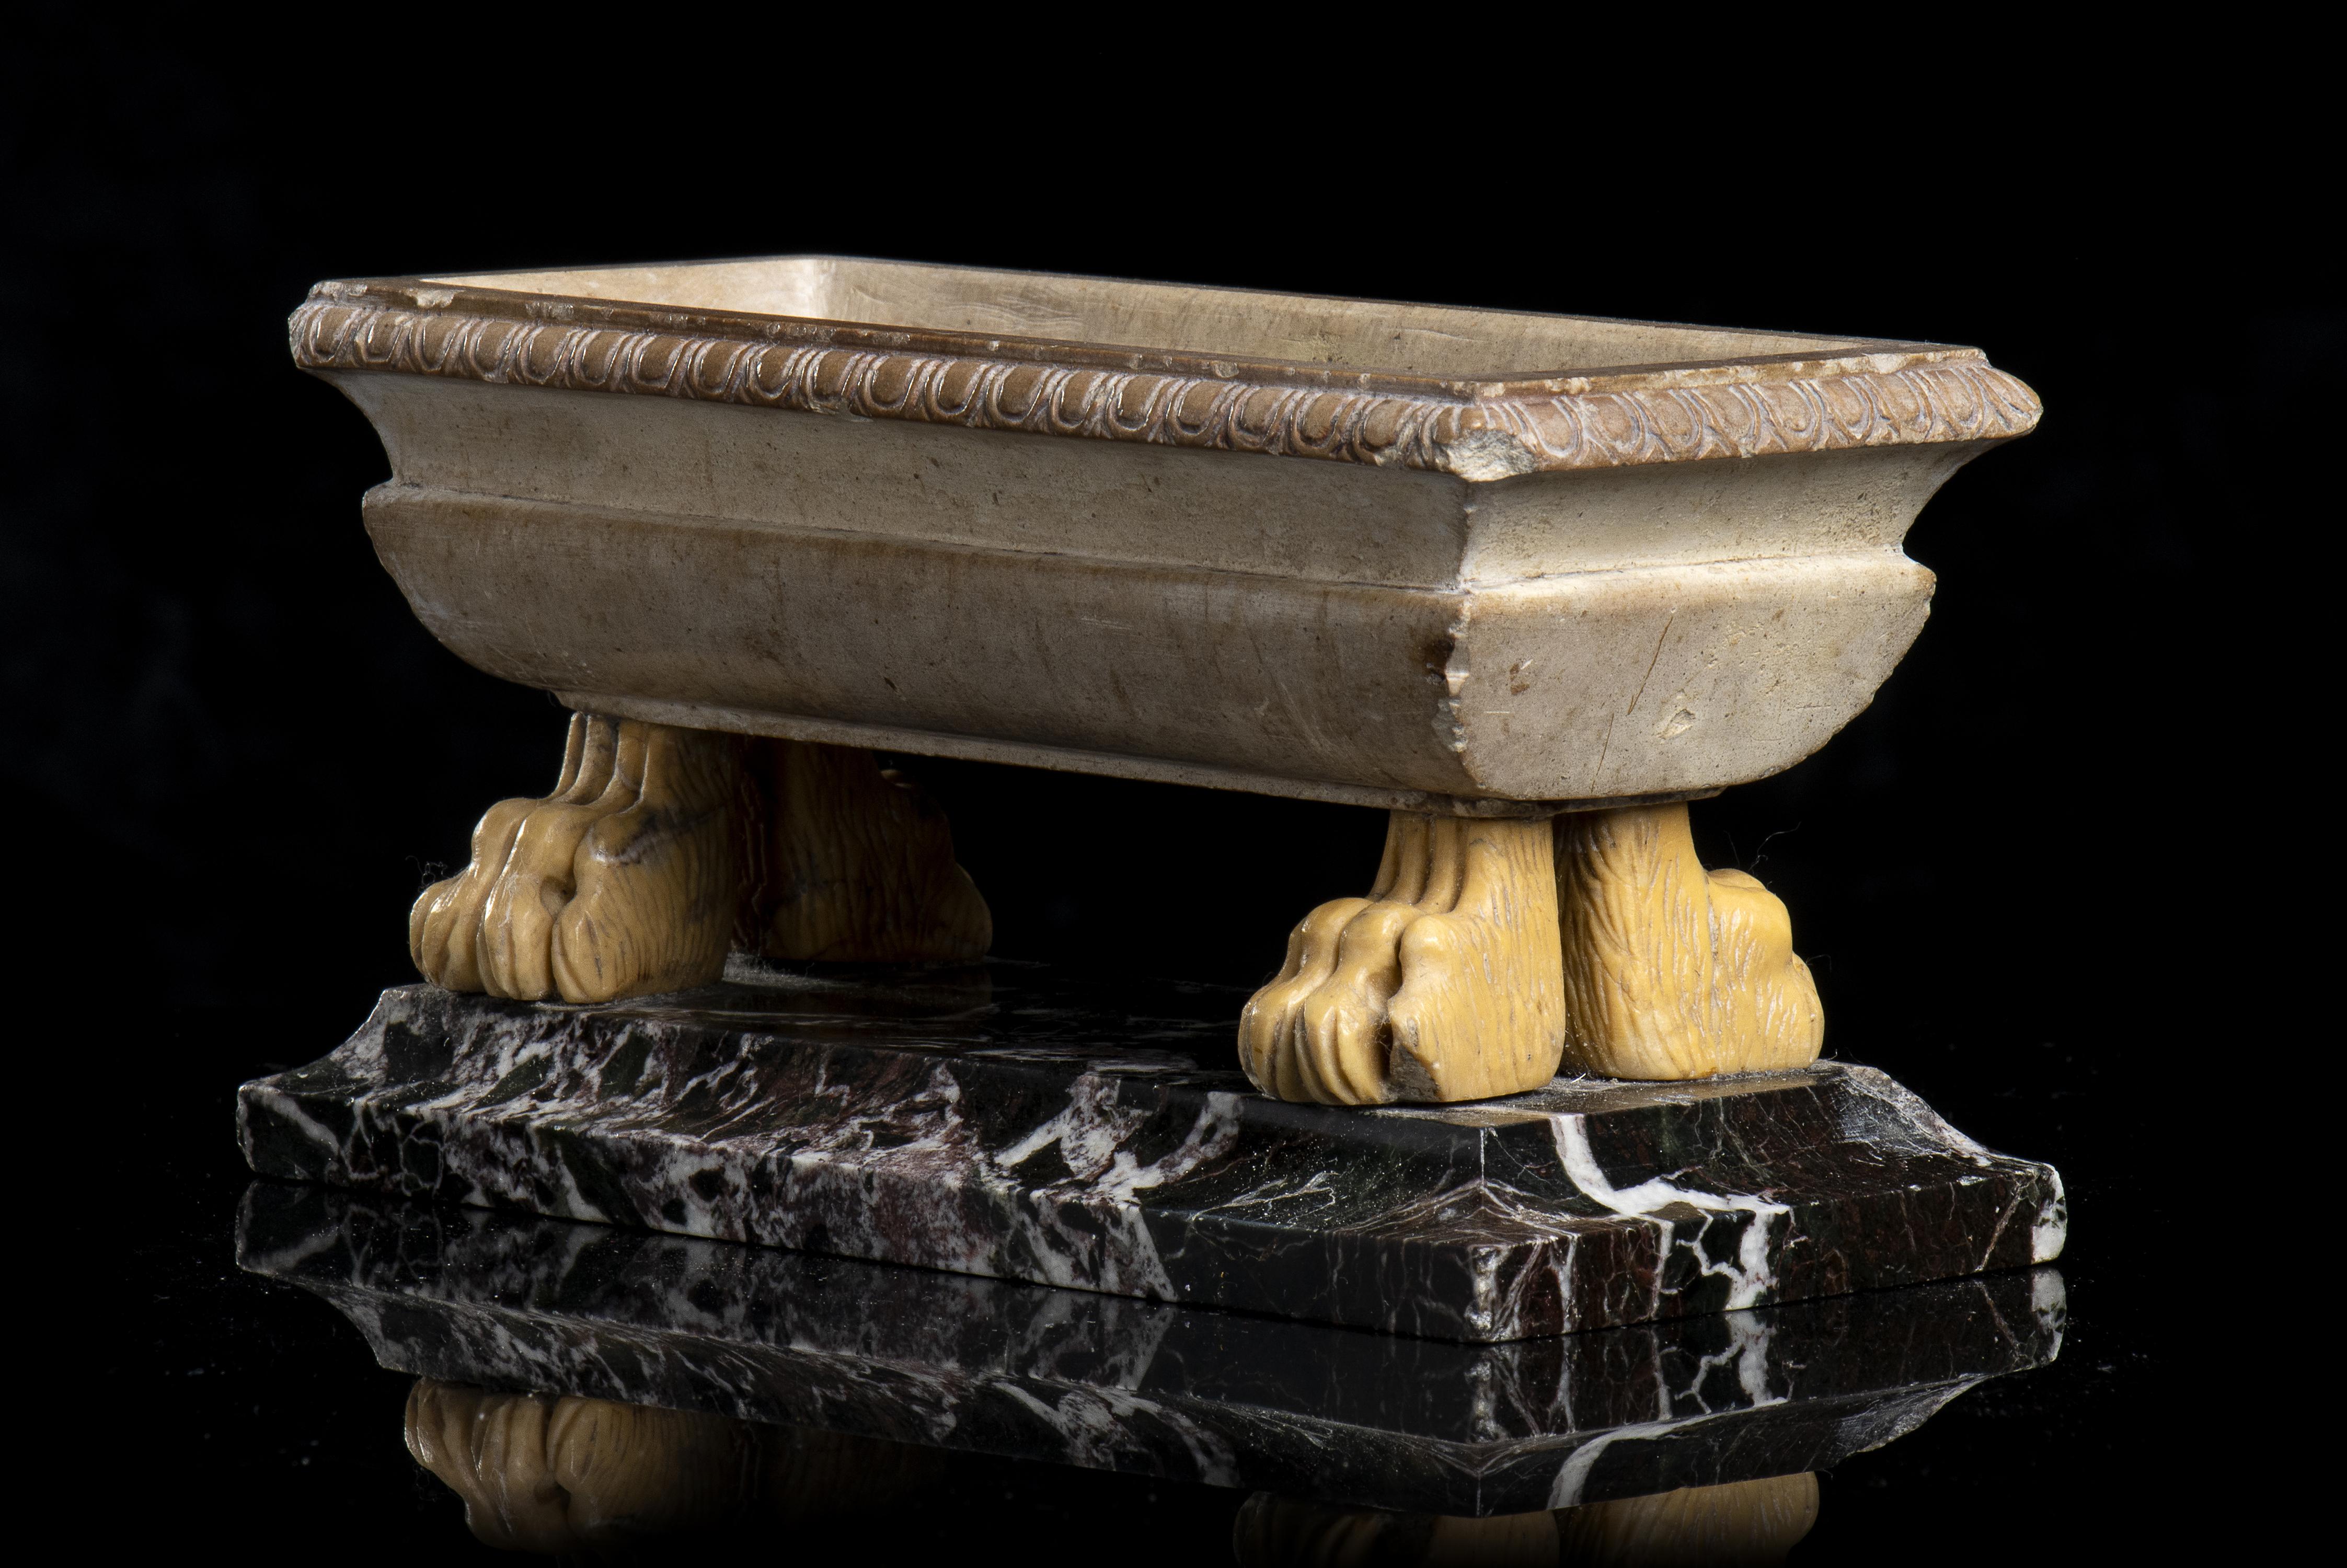 A Giallo Antico (Giallo Numidia ) marble grand tour model of a bath with ferine feet standing on a squared Violet Marble two order base. The work from the workshop of Benedetto Boschetti is a typical example of grand tour production of the 19th